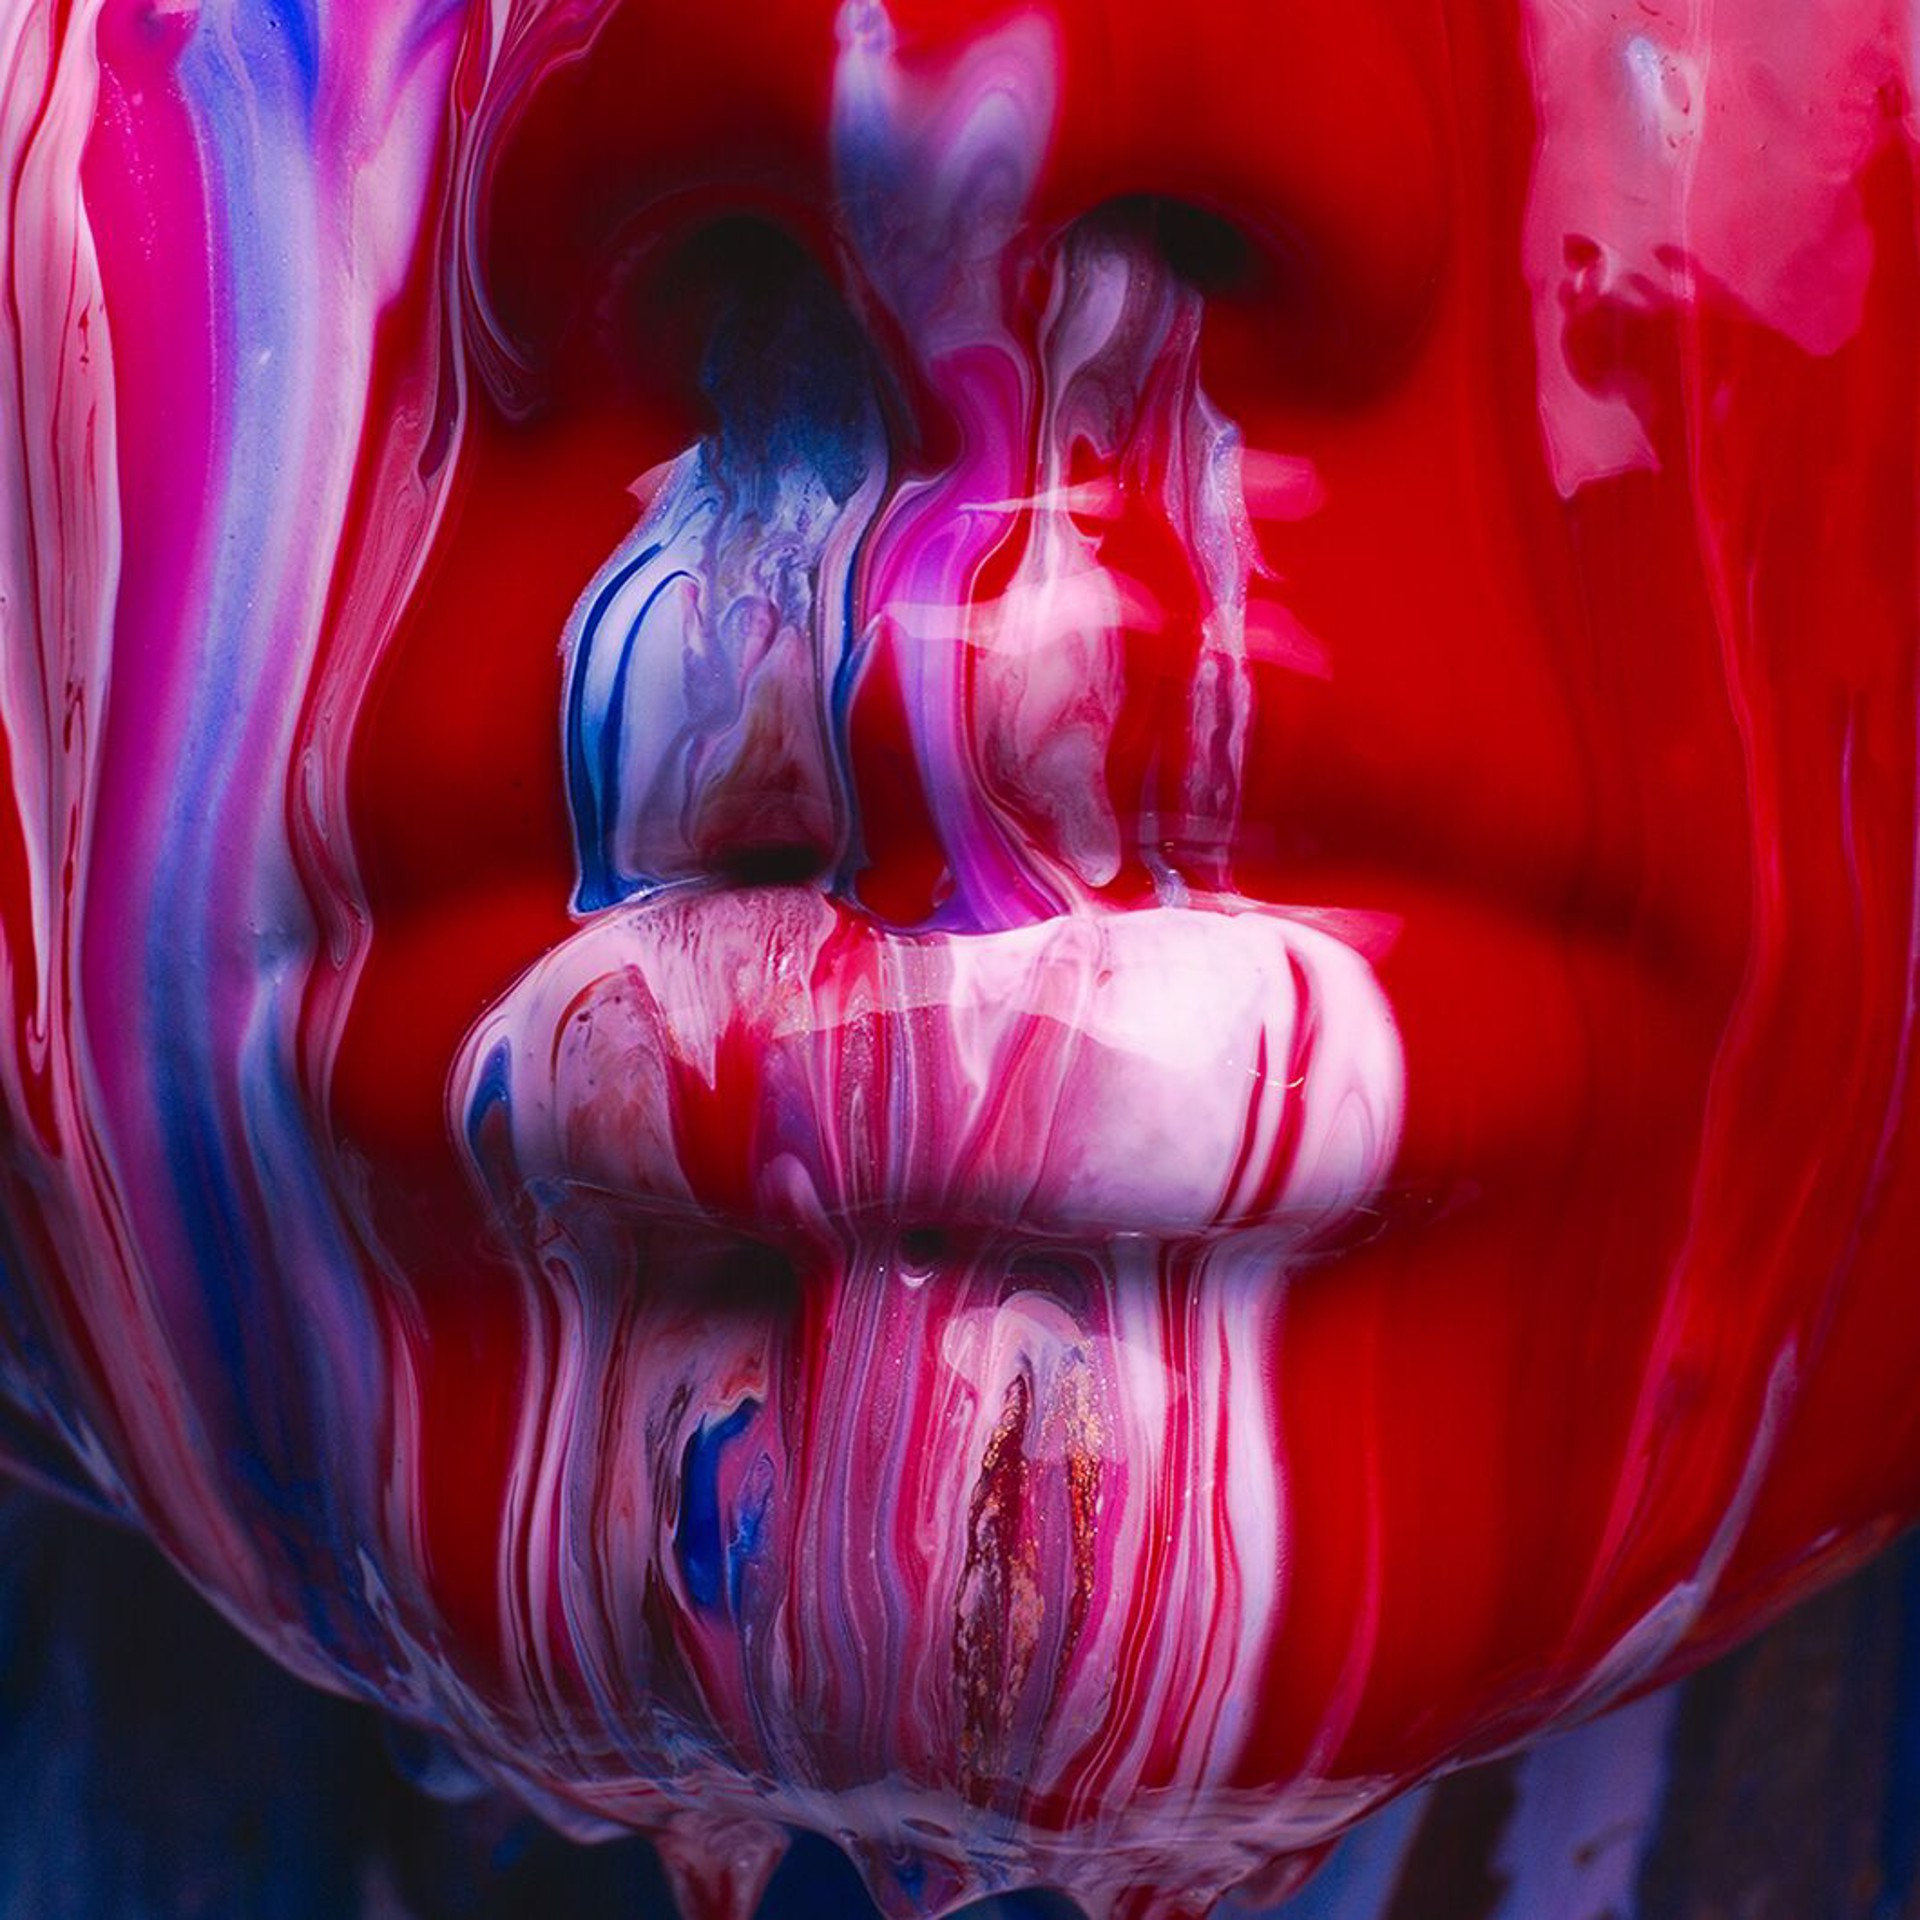 High Gloss Mouth (AP) by Tyler Shields